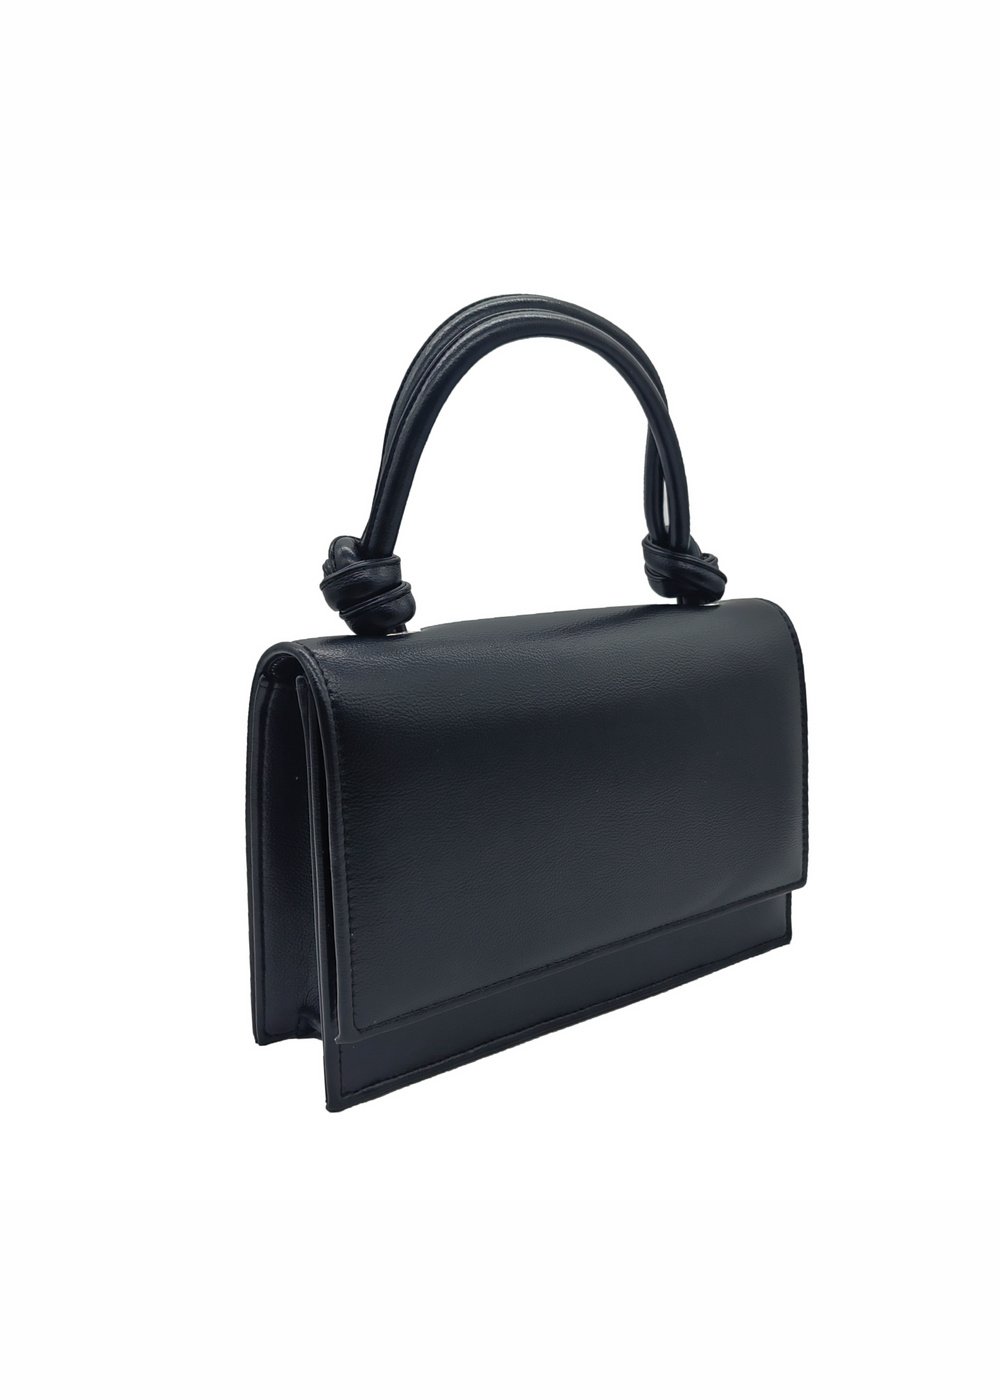 PEARL SMALL BAG WITH KNOTTED HANDLE DETAIL IN BLACK FAUX LEATHER